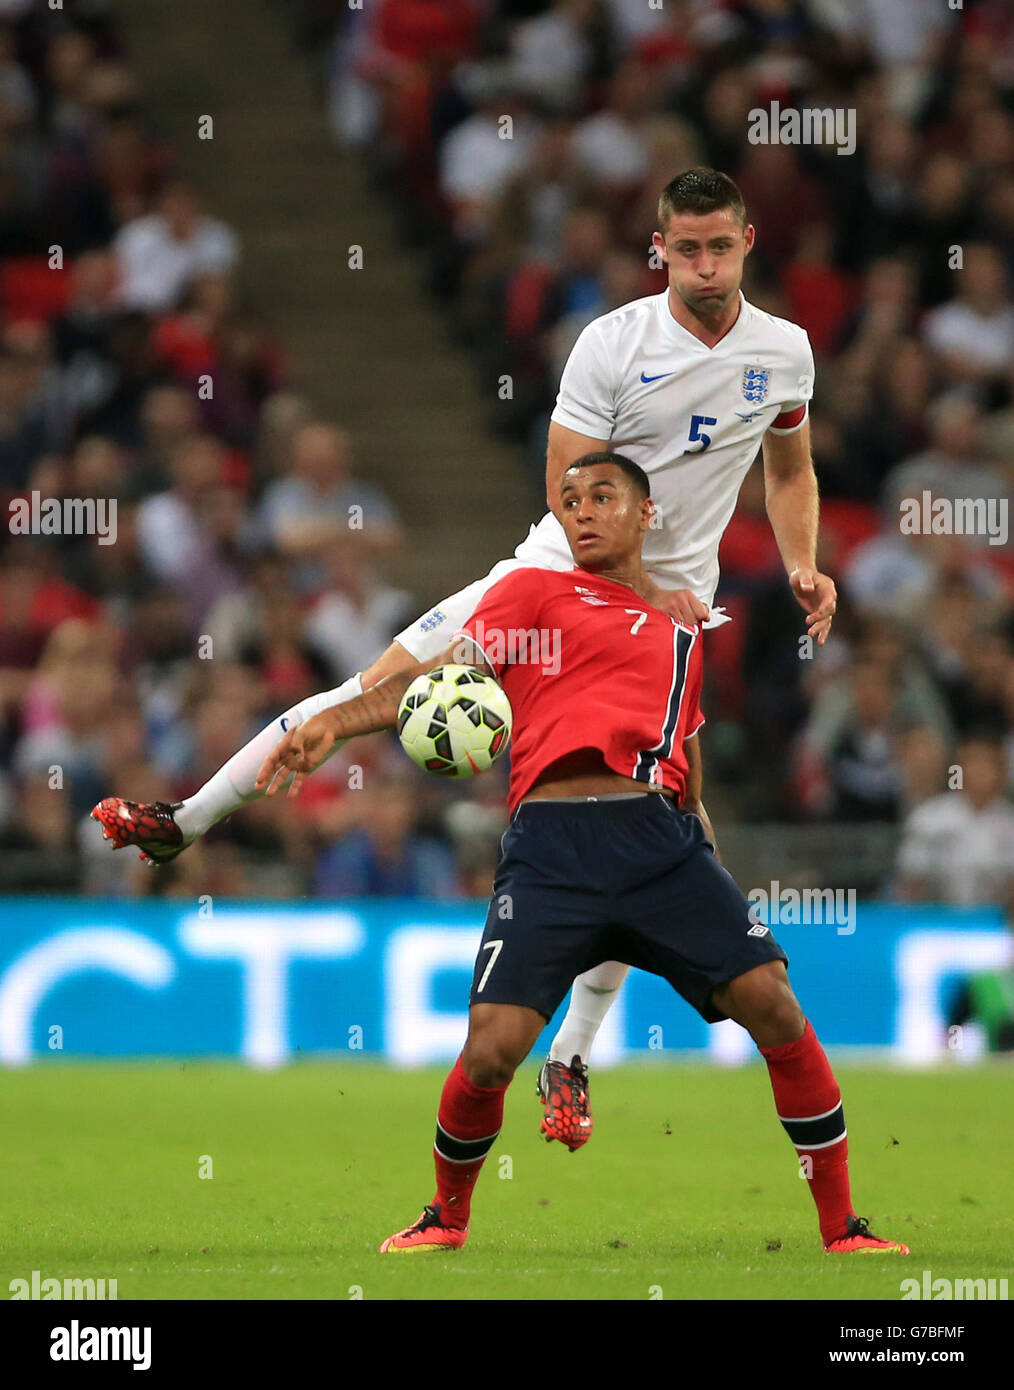 England's Gary Cahill (top) and Norway's Joshua King (bottom) battle for the ball in the air during the International Friendly at Wembley Stadium, London. PRESS ASSOCIATION Photo. Picture date: Wednesday September 3, 2014. See PA story SOCCER England. Photo credit should read: Nick Potts/PA Wire. Stock Photo